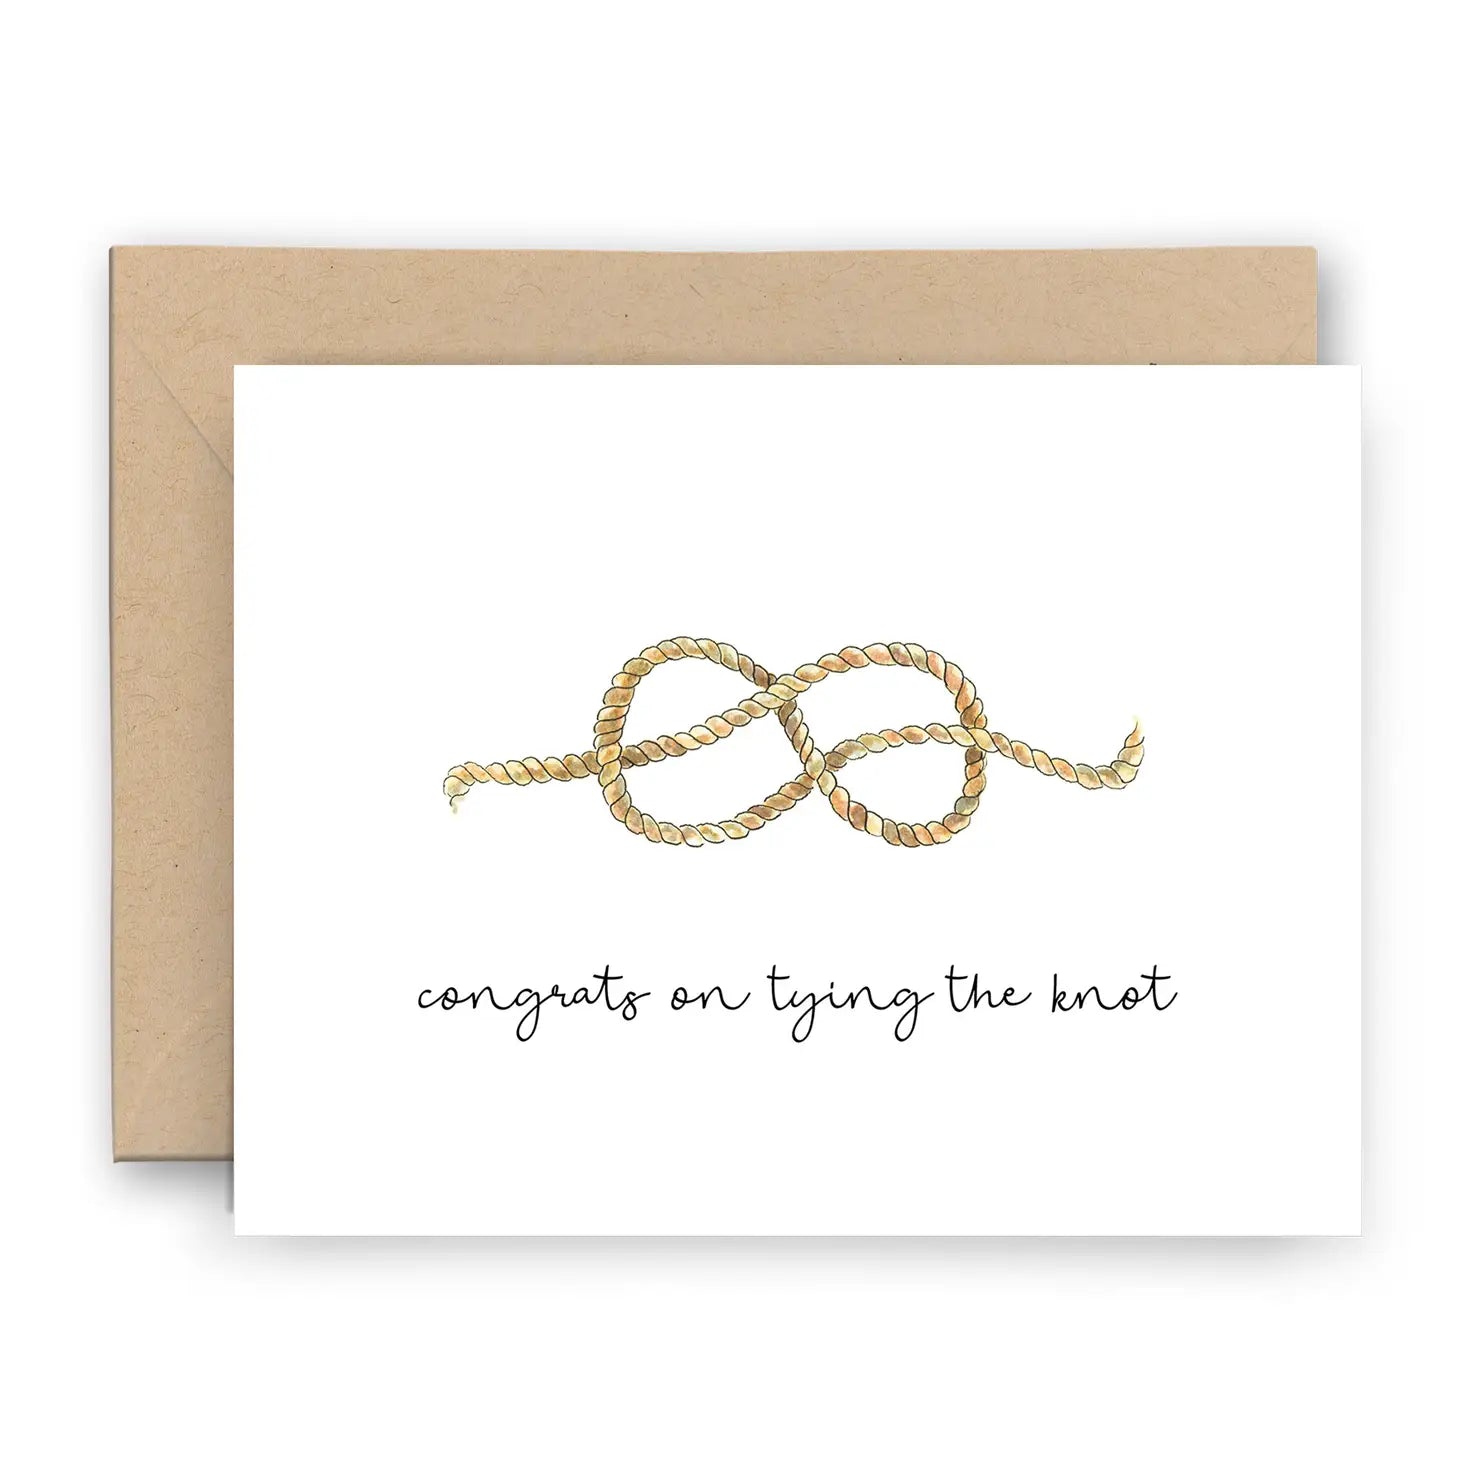 Tying The Knot Hand Drawn Greeting Card